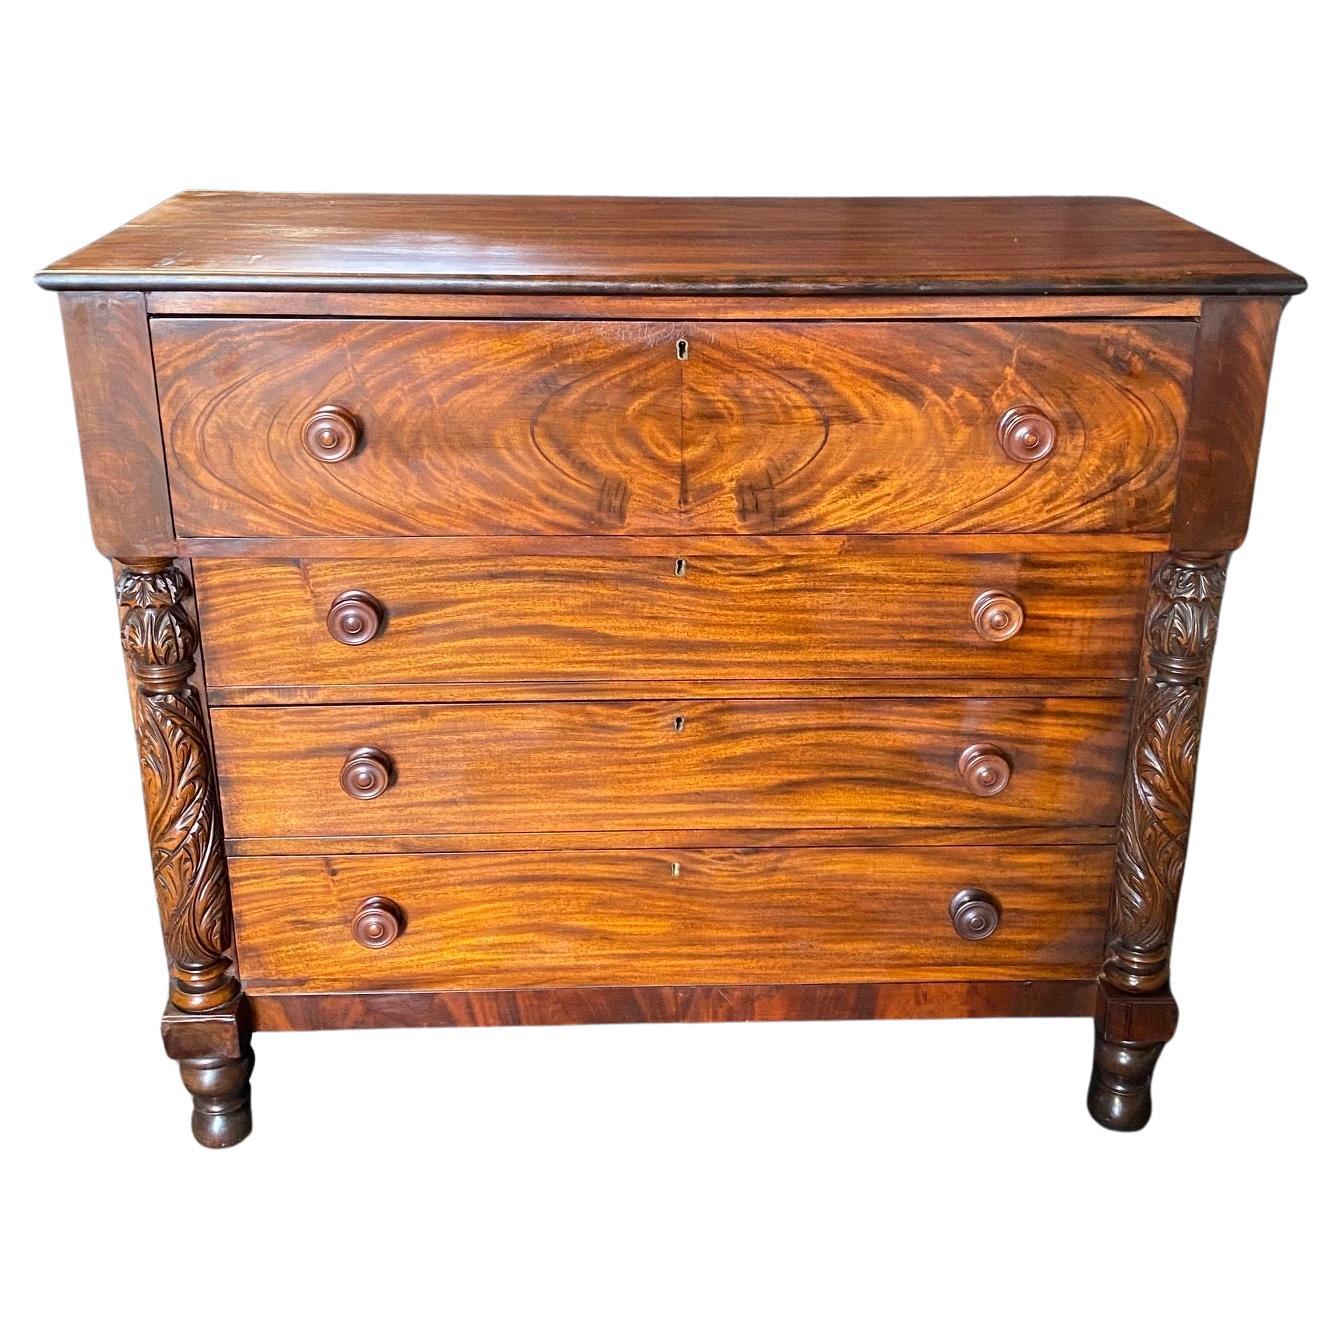 What is a men's chest of drawers called?